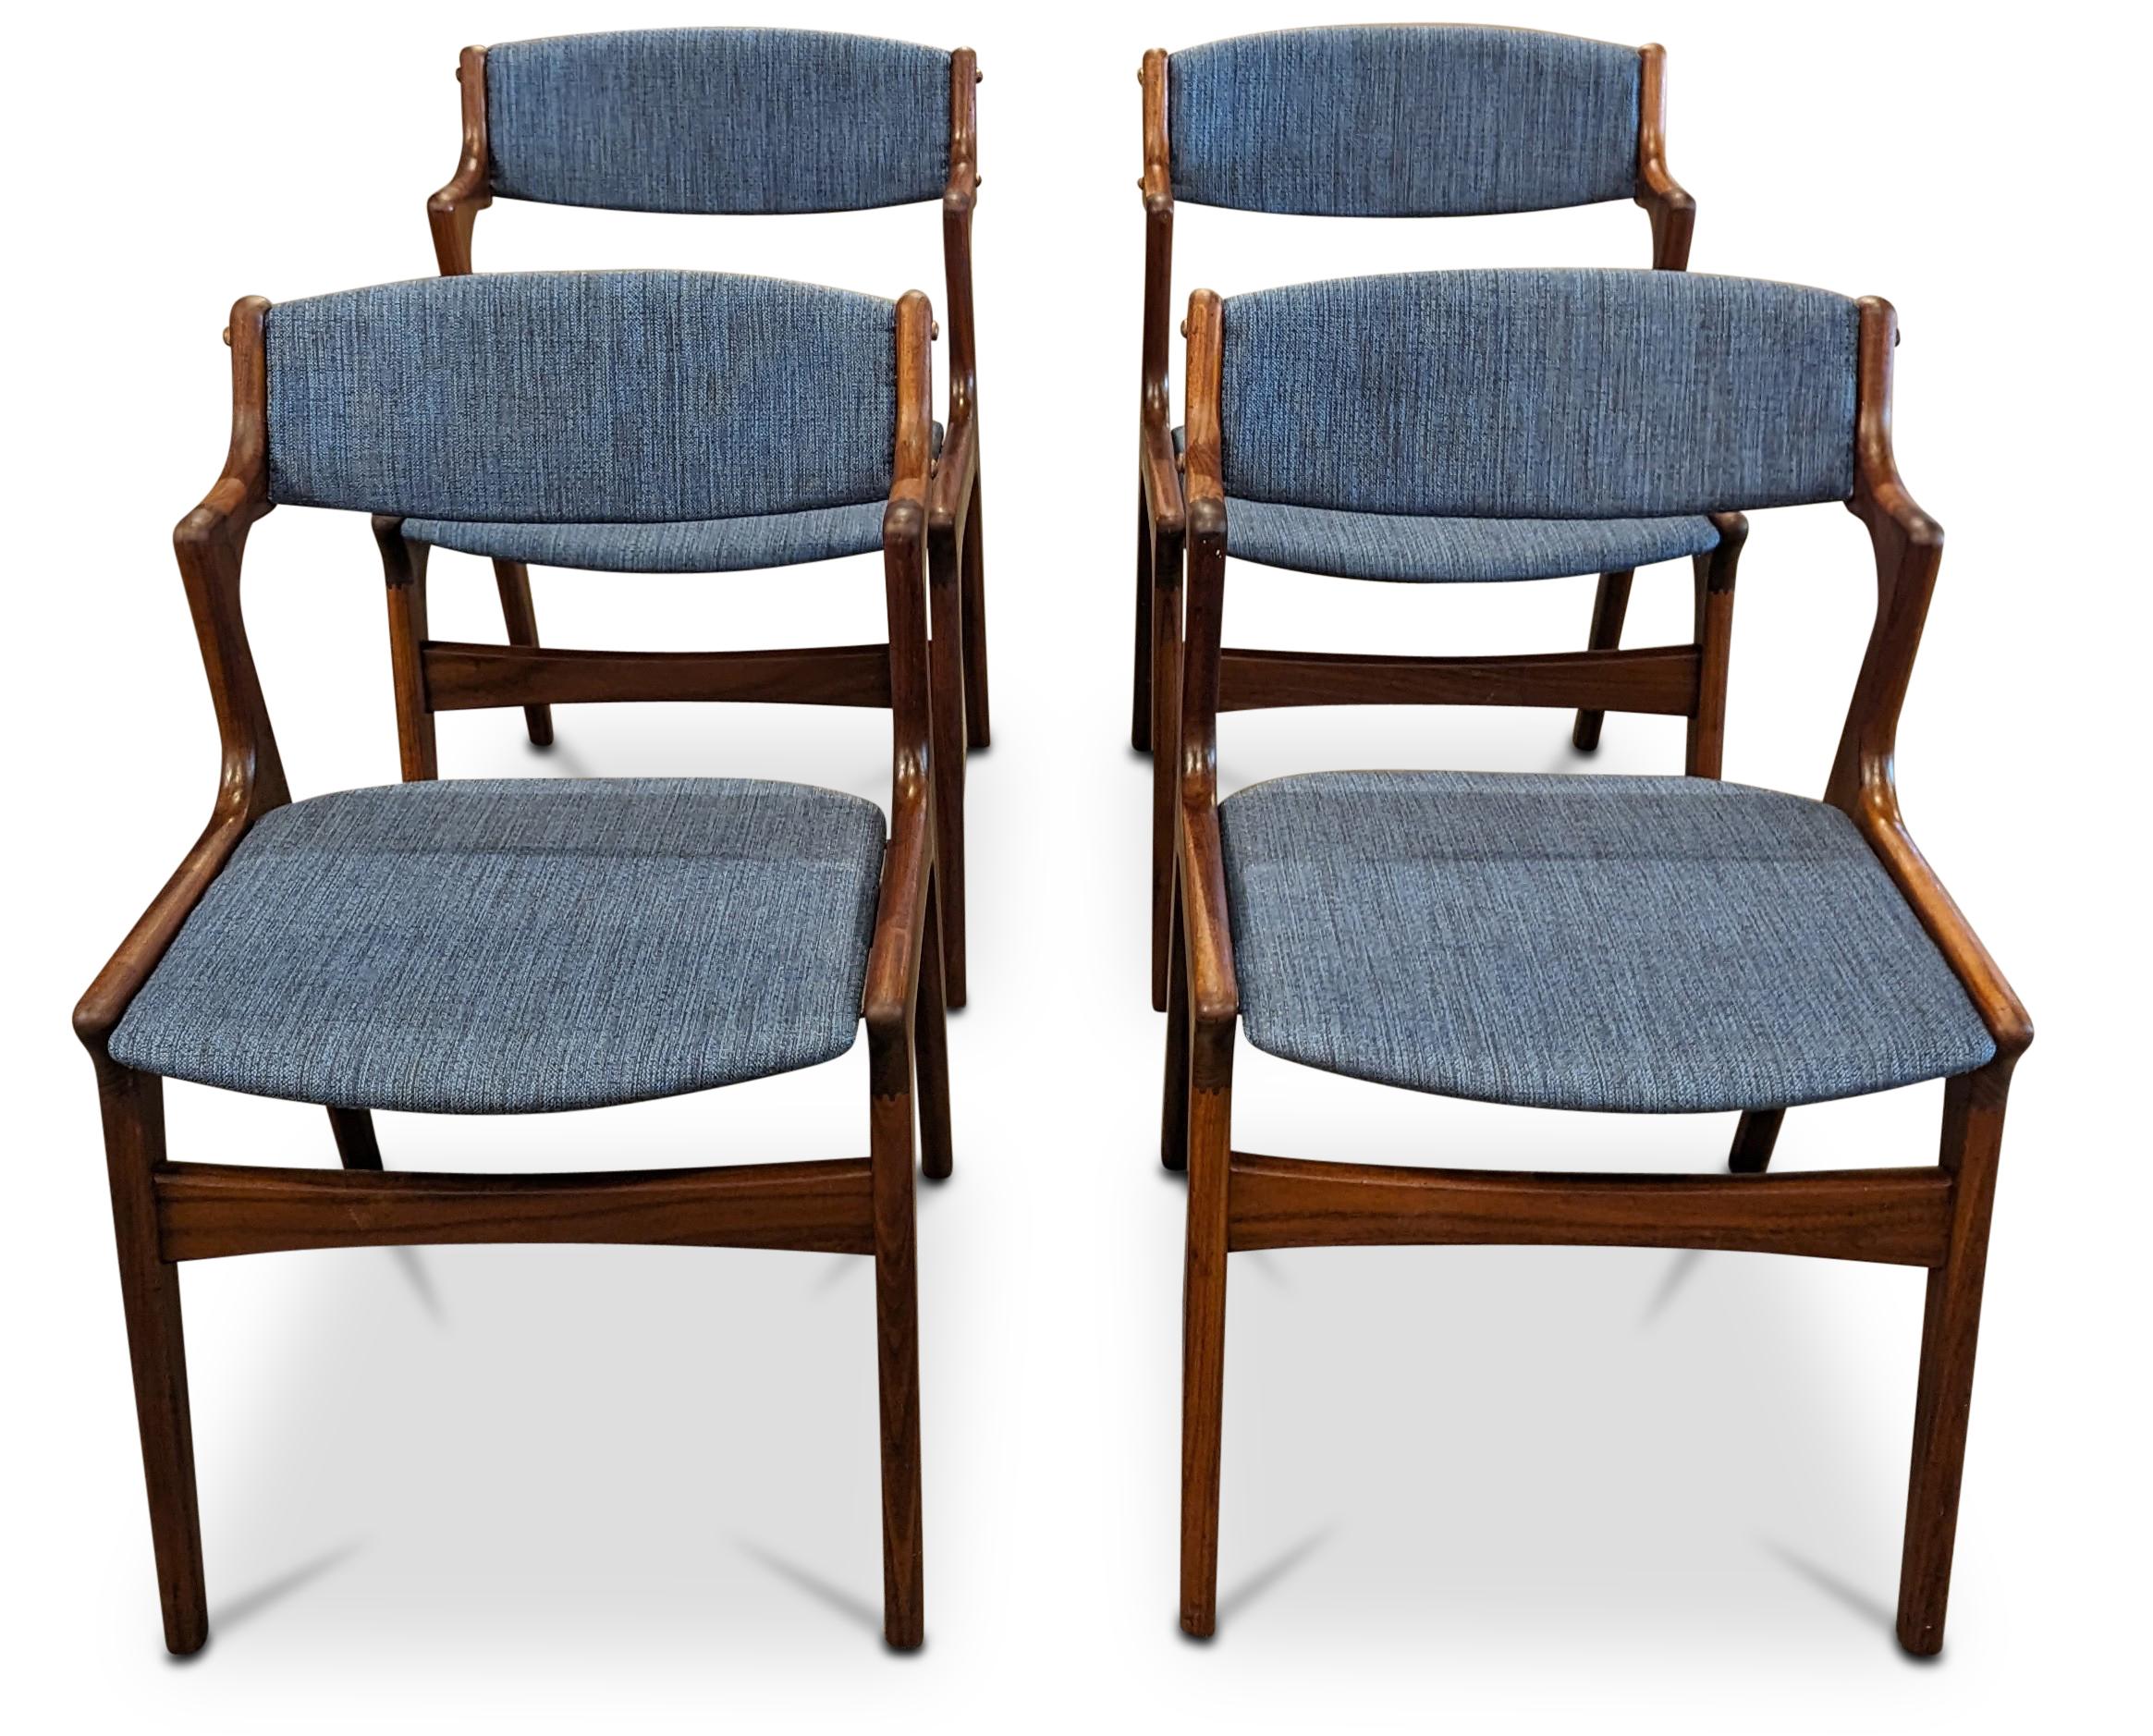 New Upholstery - Blue Fabric

Vintage Danish mid-century modern, made in the 1950's - Recently refurbished

The piece is more than 65+ years old and some wear and tear can be expected, but we do everything we can to refurbish them in respect to the